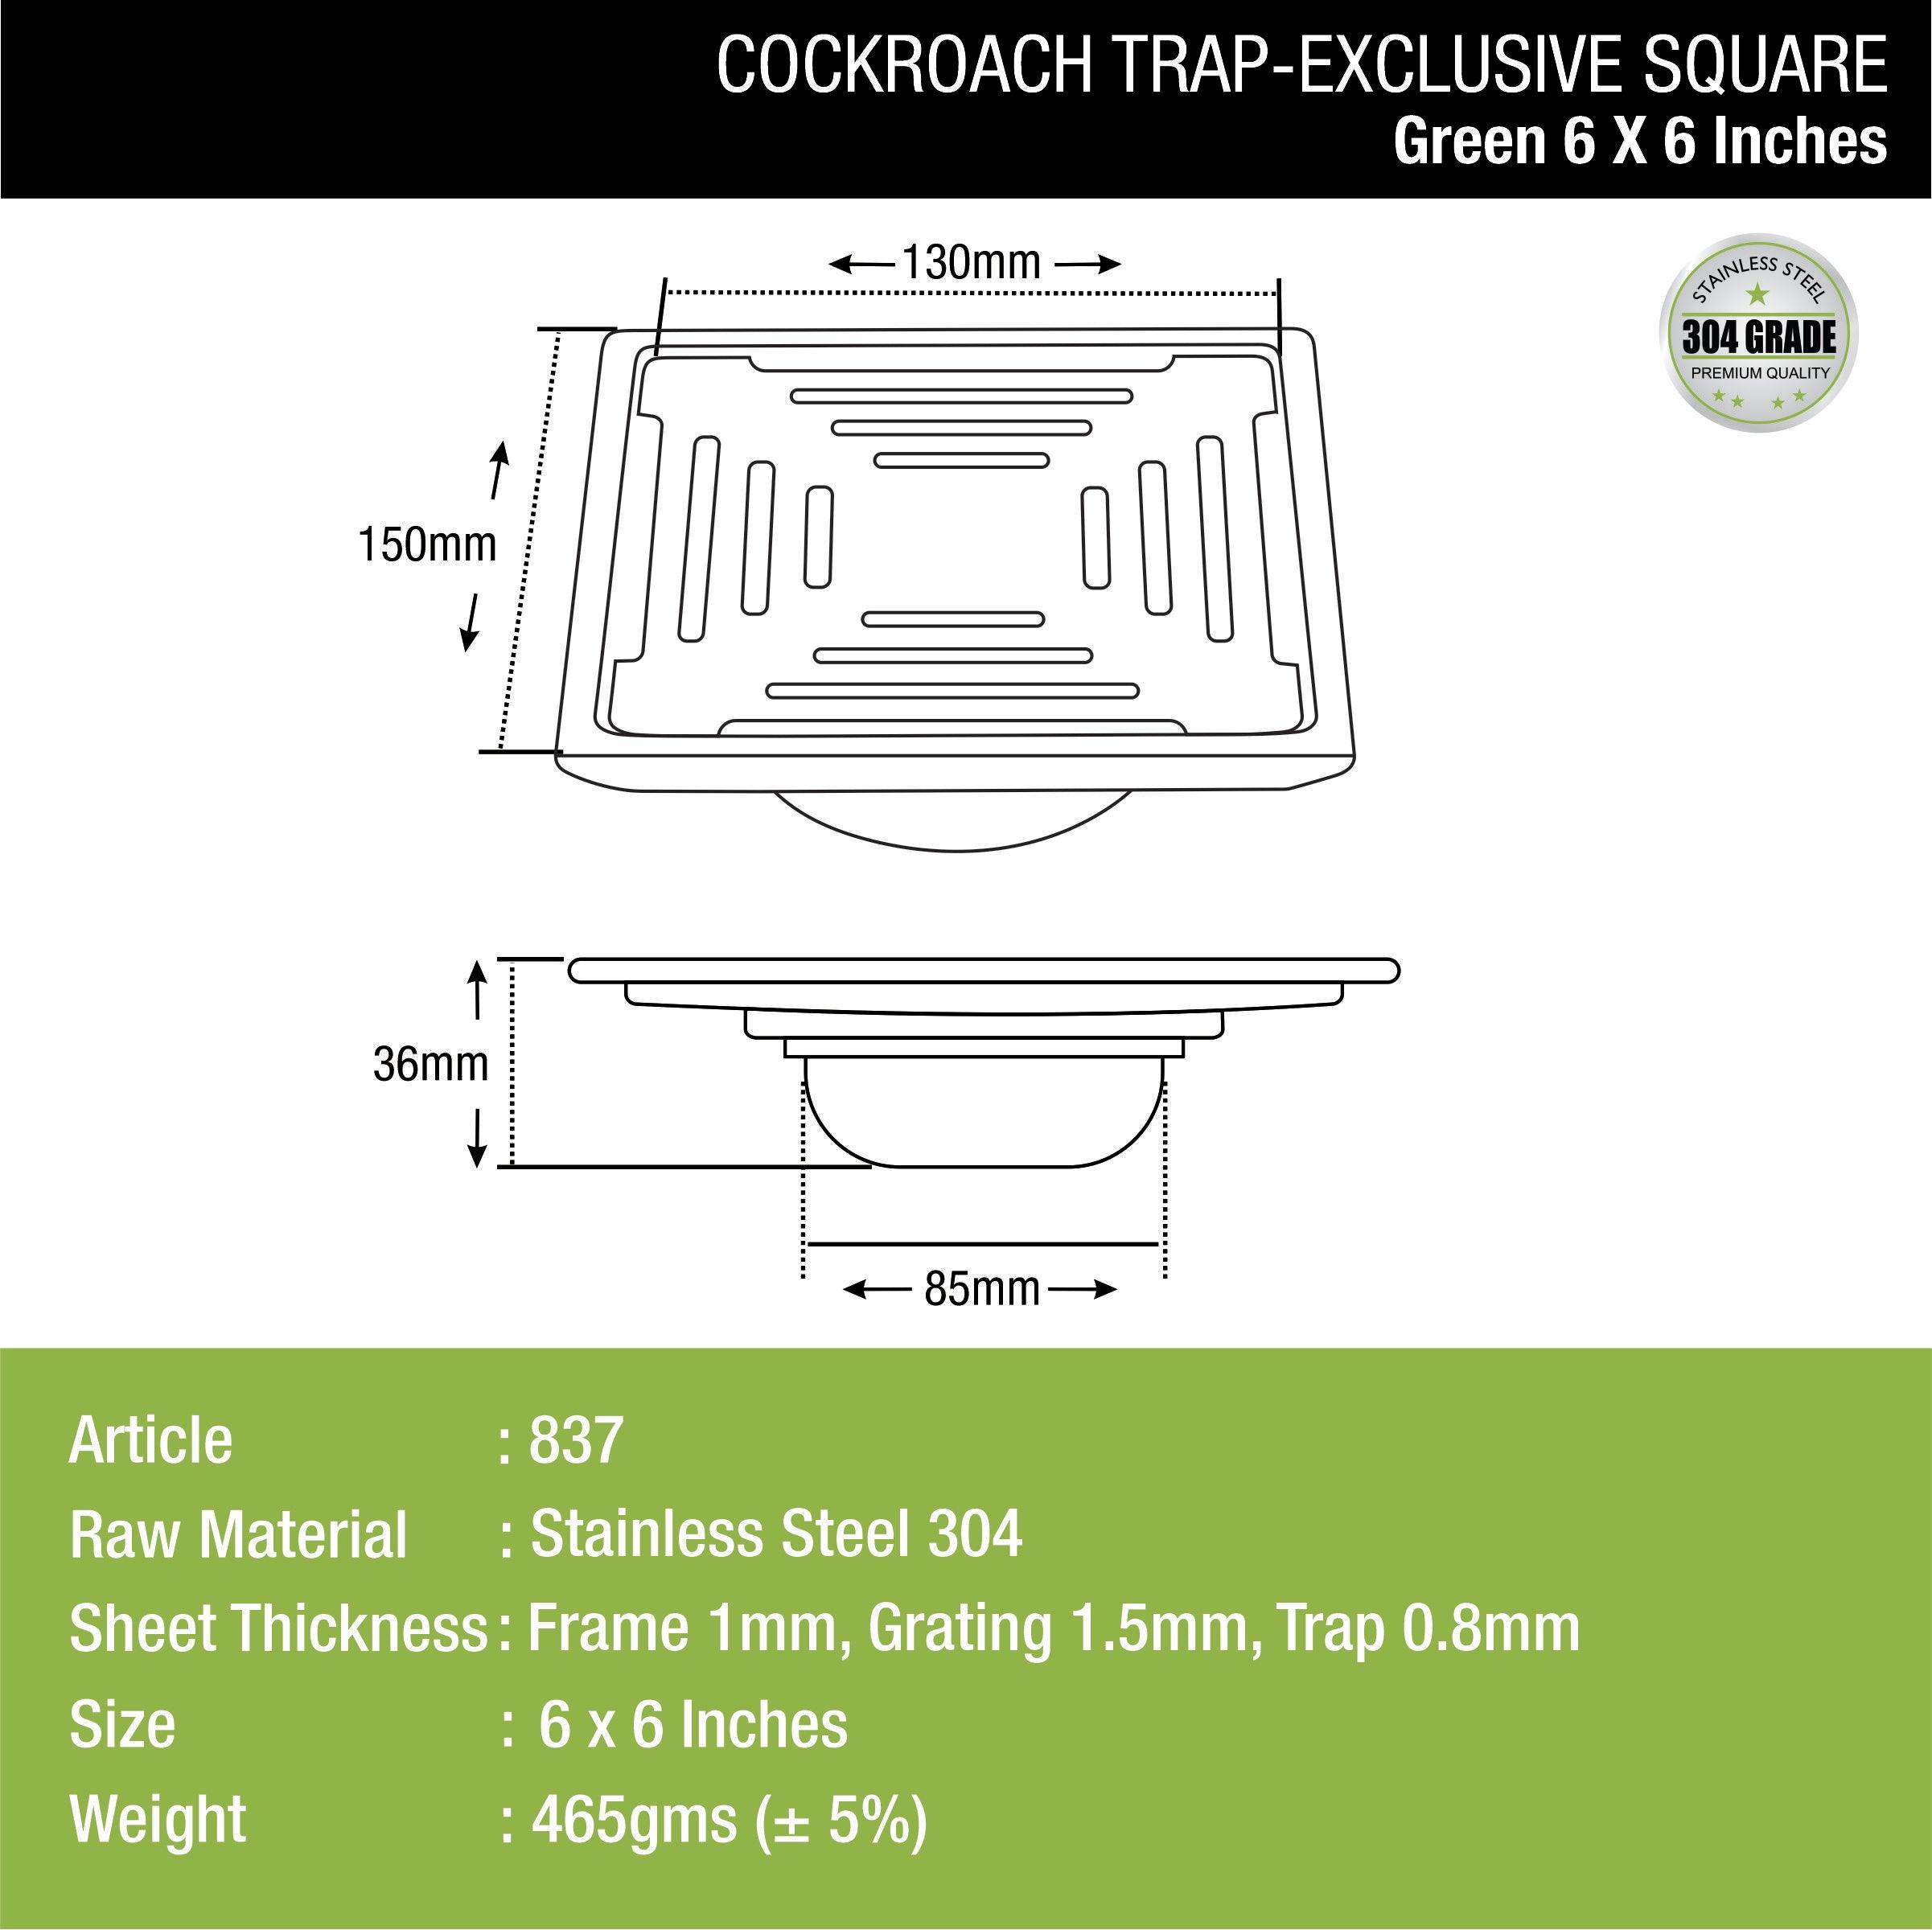 Green Exclusive Square Floor Drain (6 x 6 Inches) with Cockroach Trap dimensions and sizes